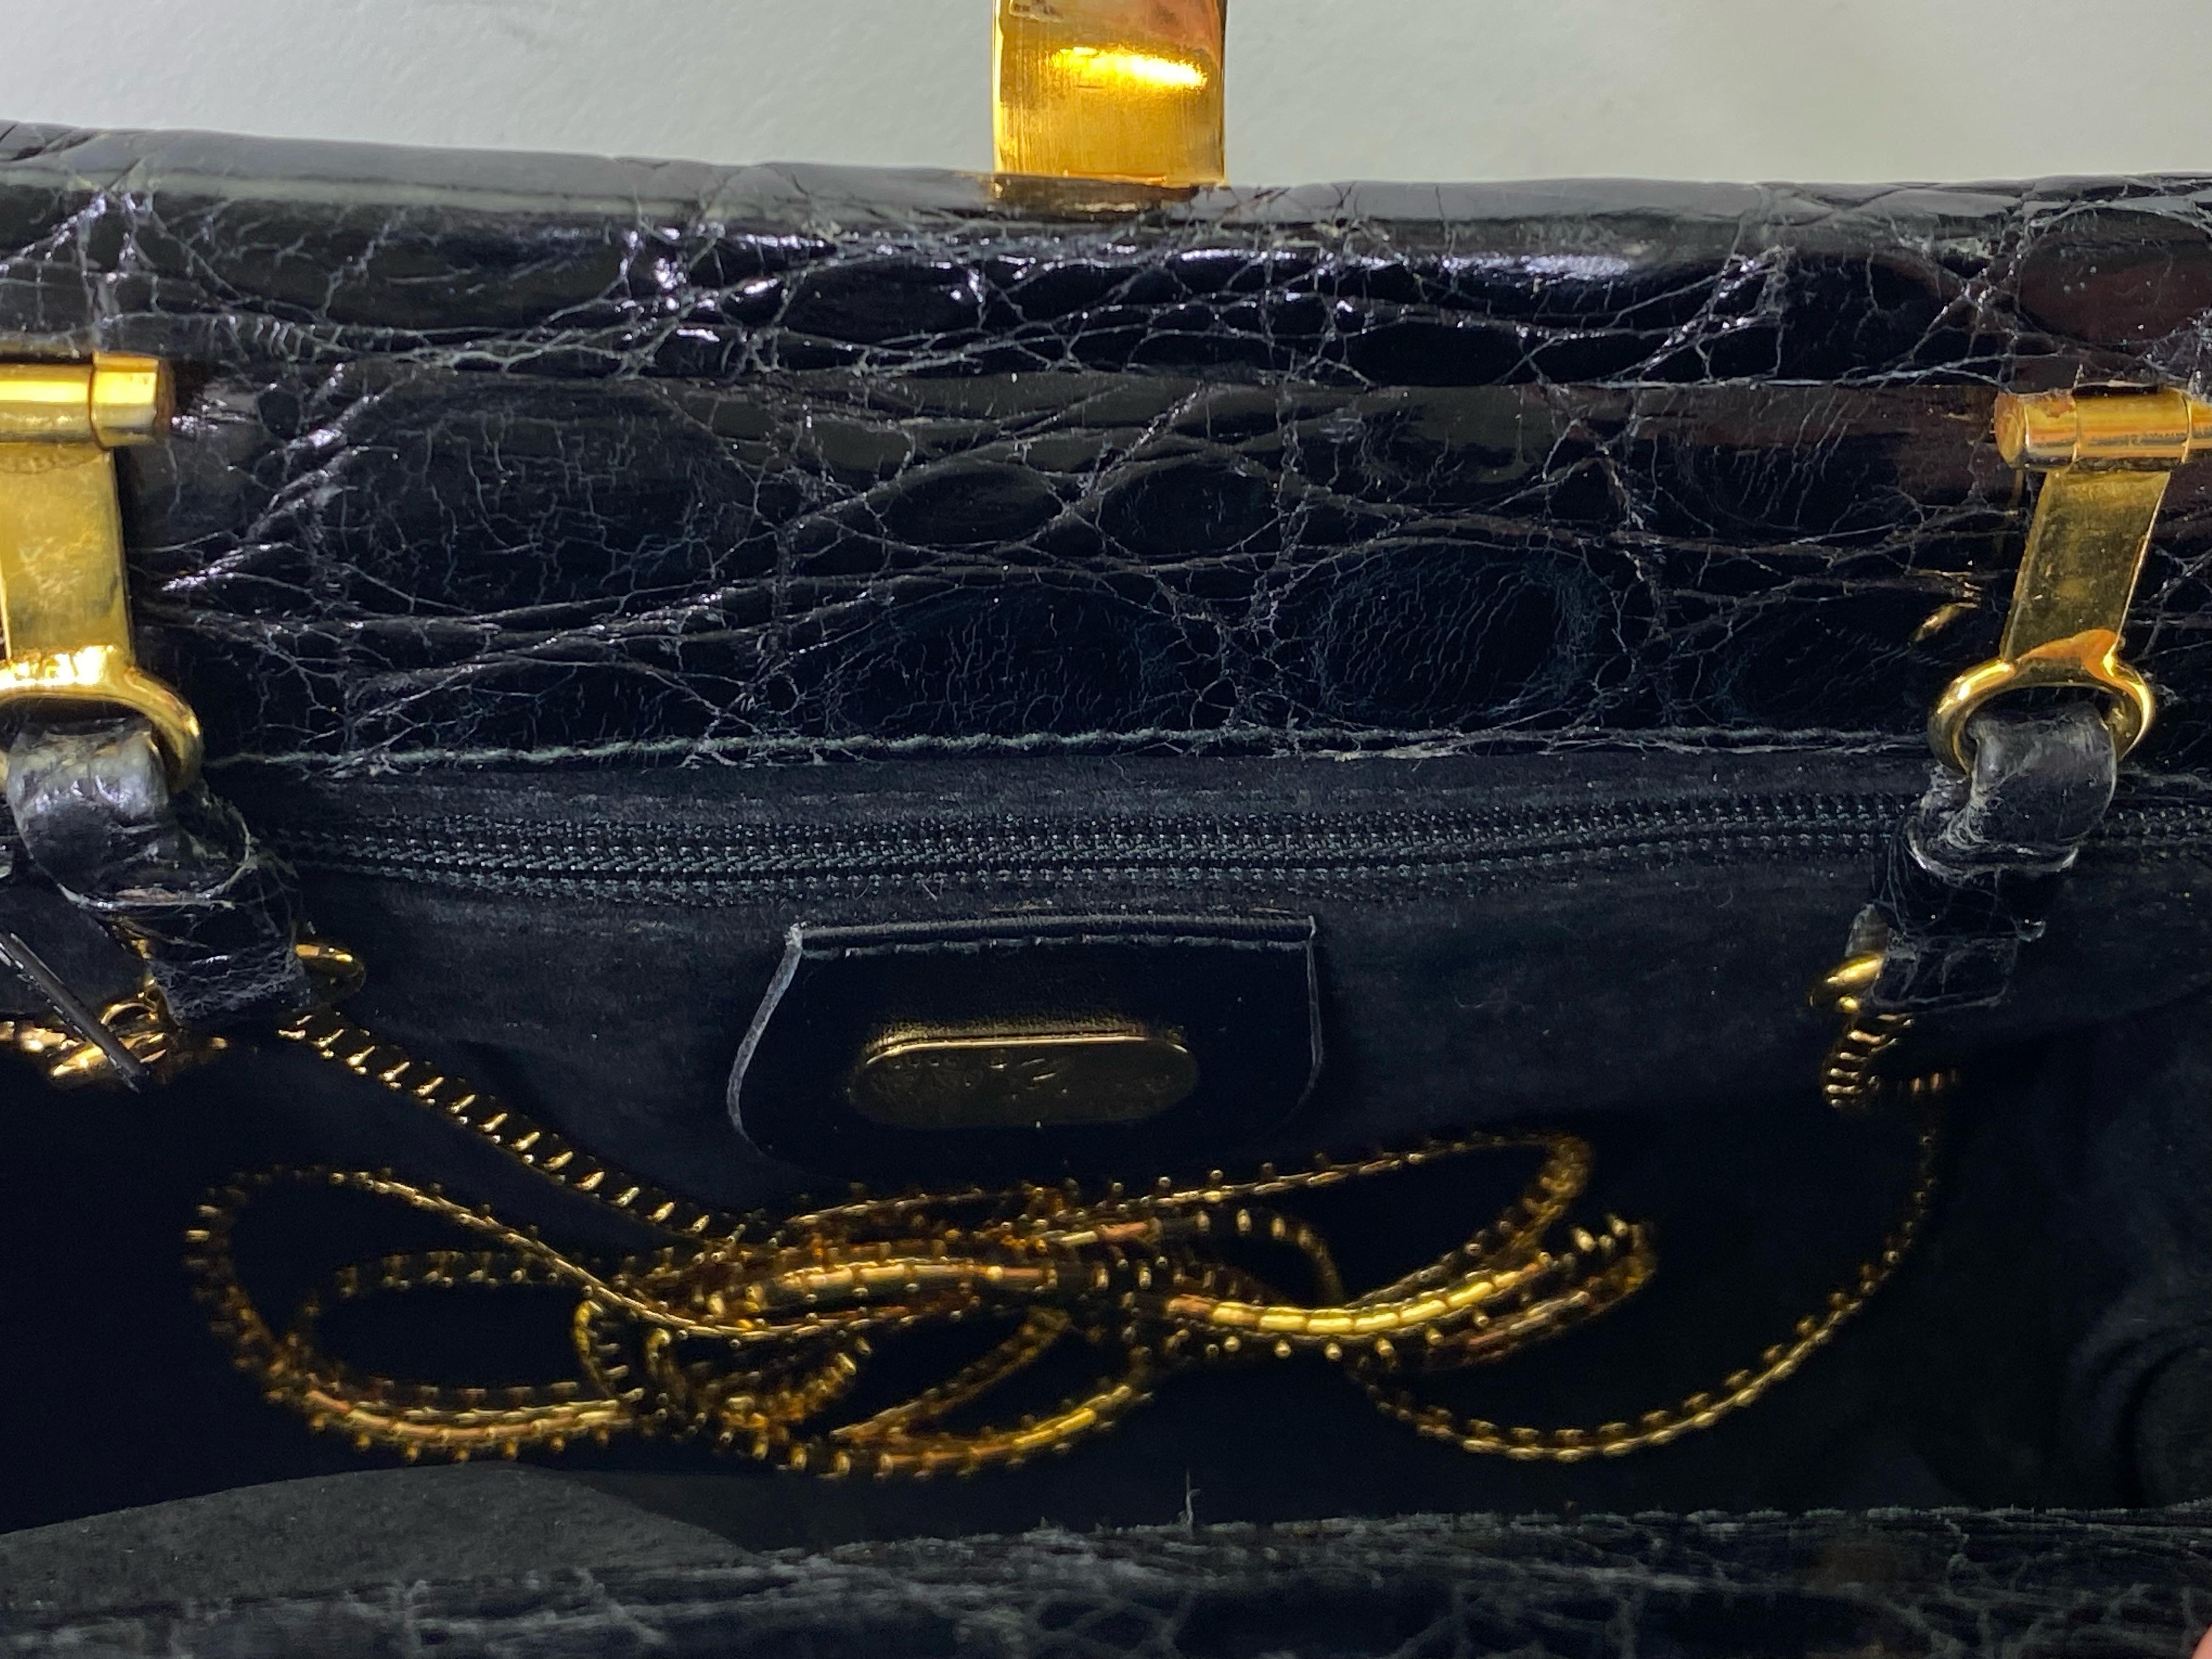 S/S 1987 Gucci Black Alligator Documented Chain Crossbody Clutch In Excellent Condition For Sale In West Hollywood, CA